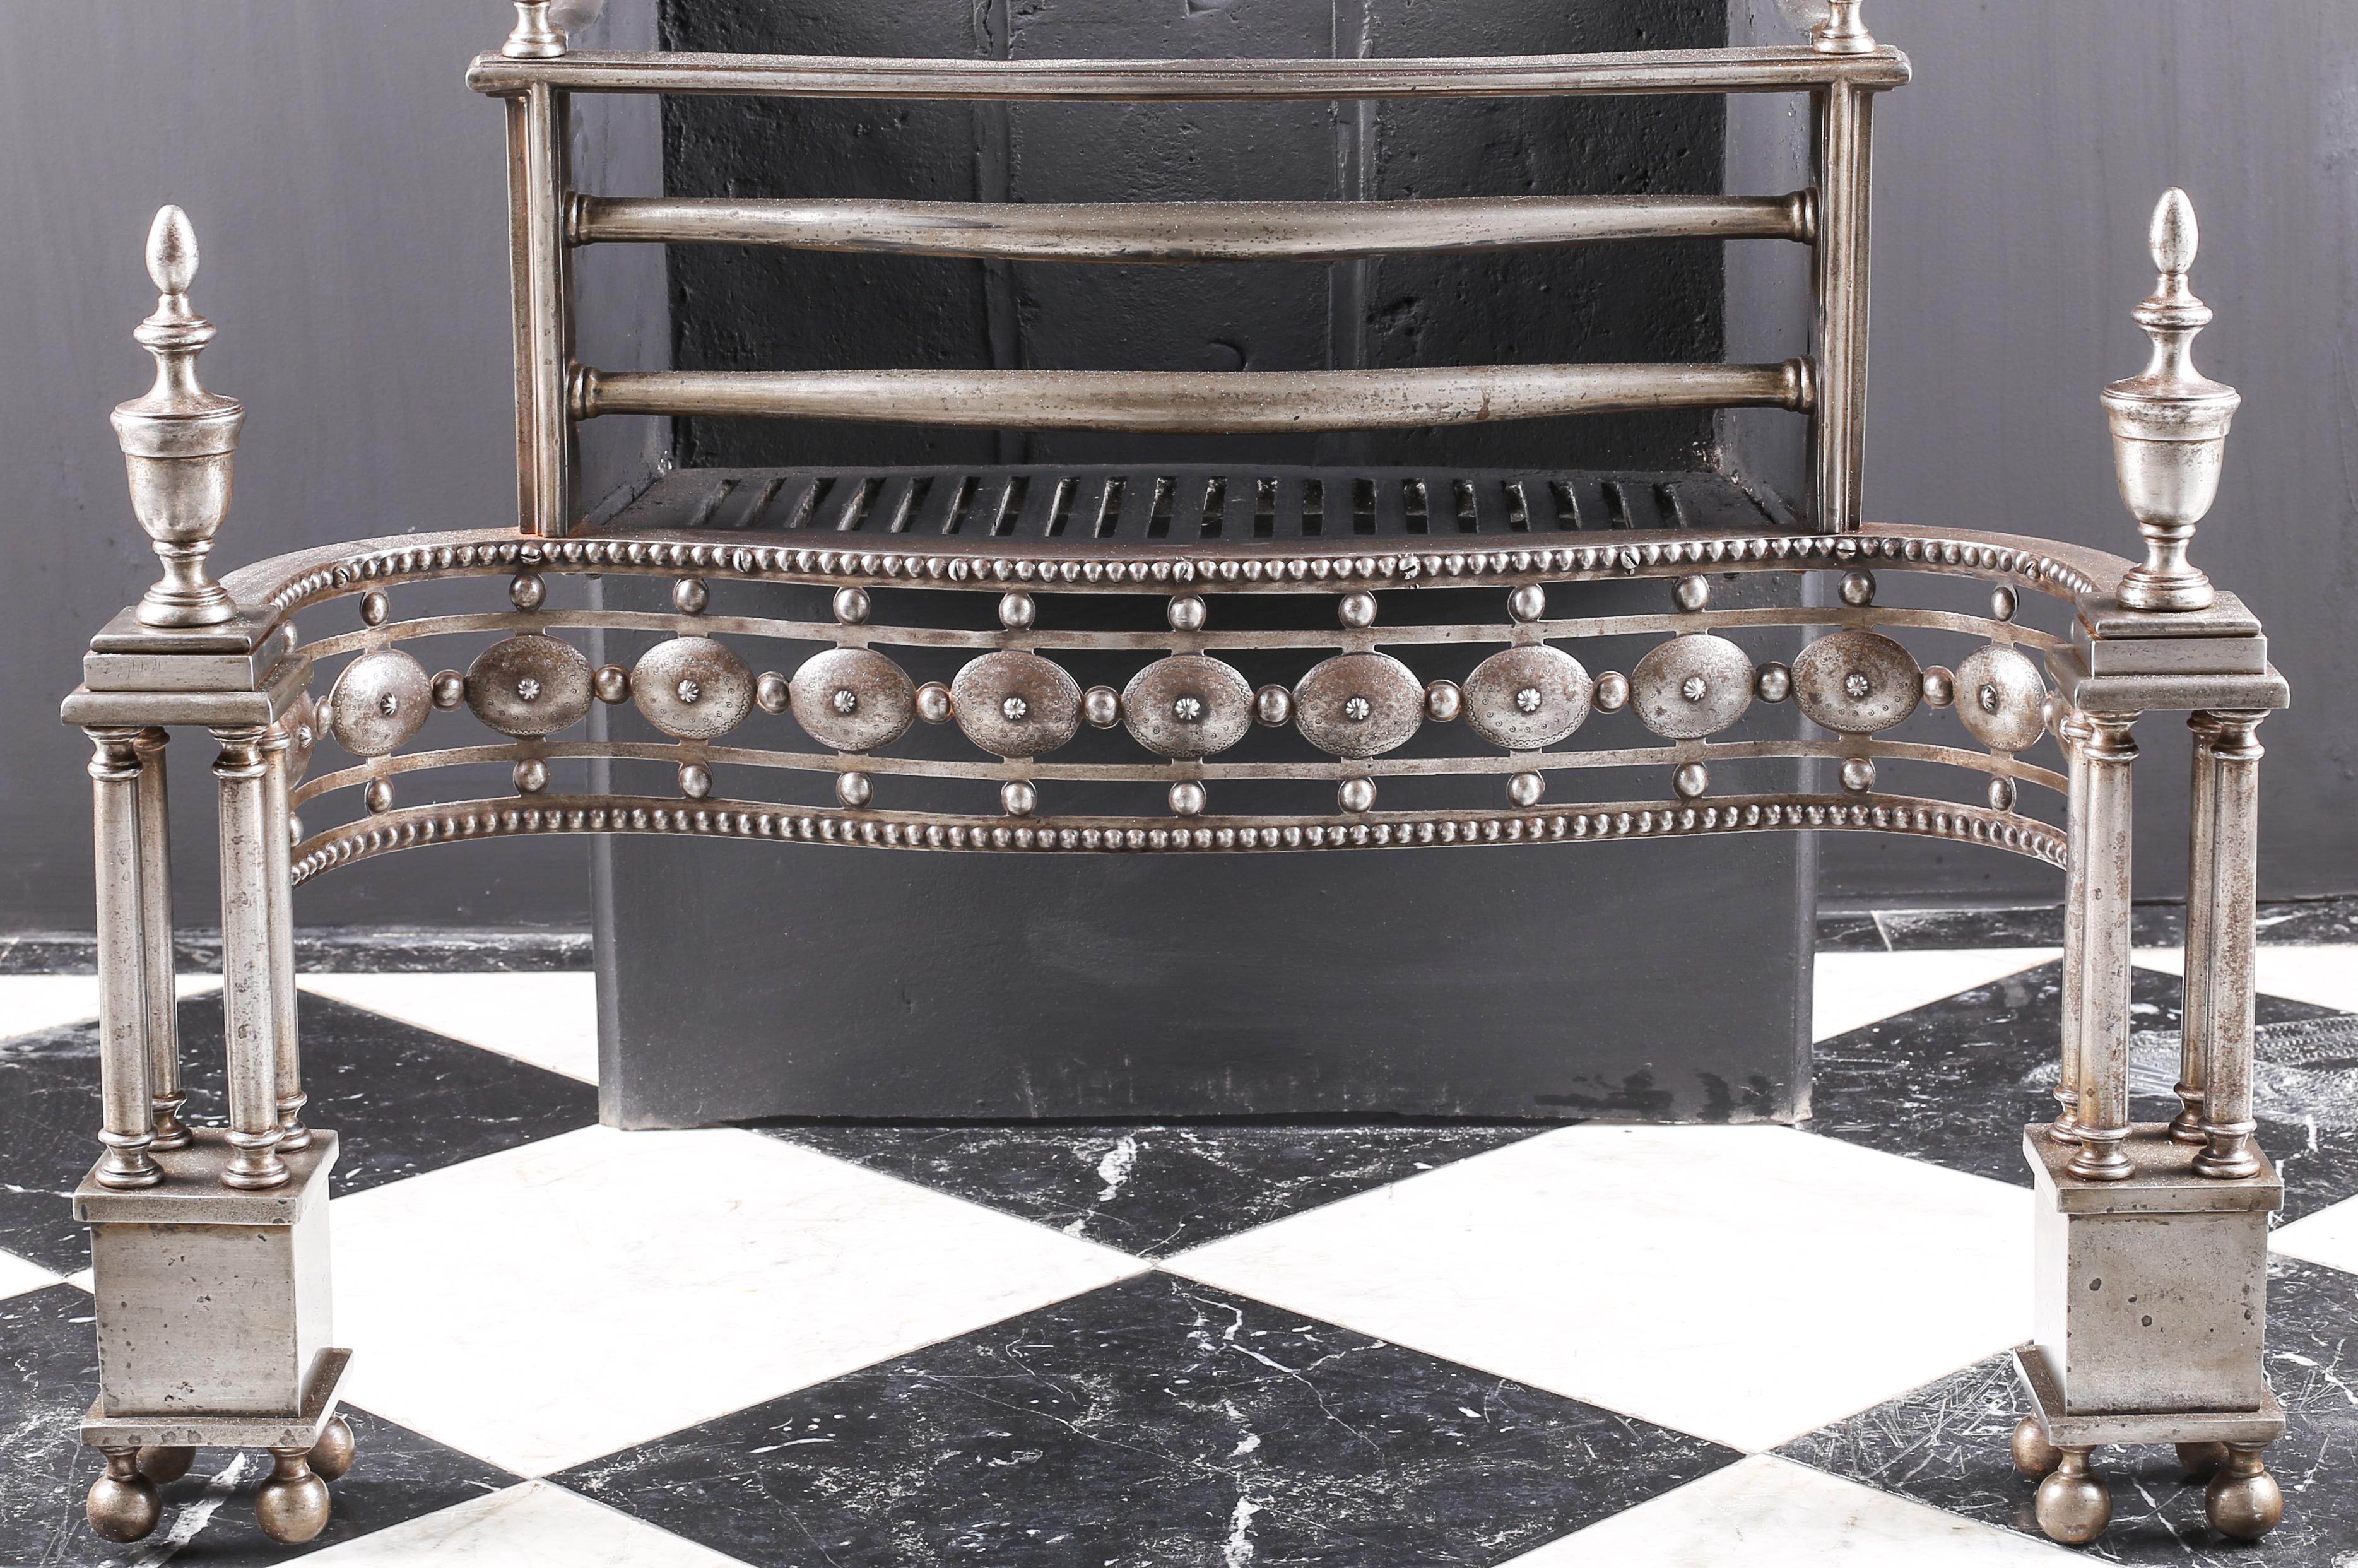 A fine and grand Georgian style steel and cast iron engraved antique fire basket, English, circa 1870.

Measures: Depth 19